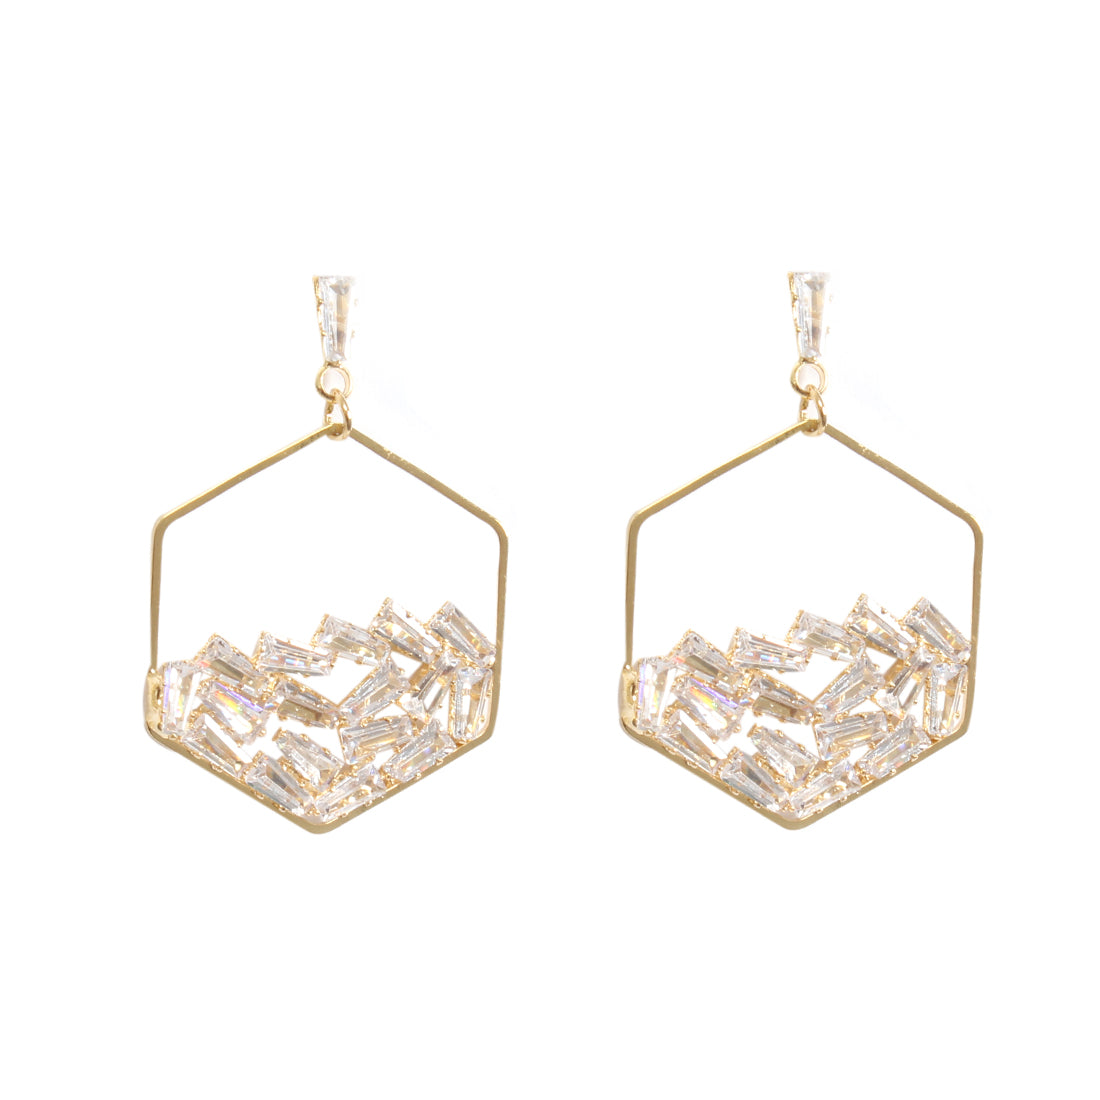 CONTEMPORARY STONE STUDDED GOLD-TONED HEXAGON DROP EARRINGS